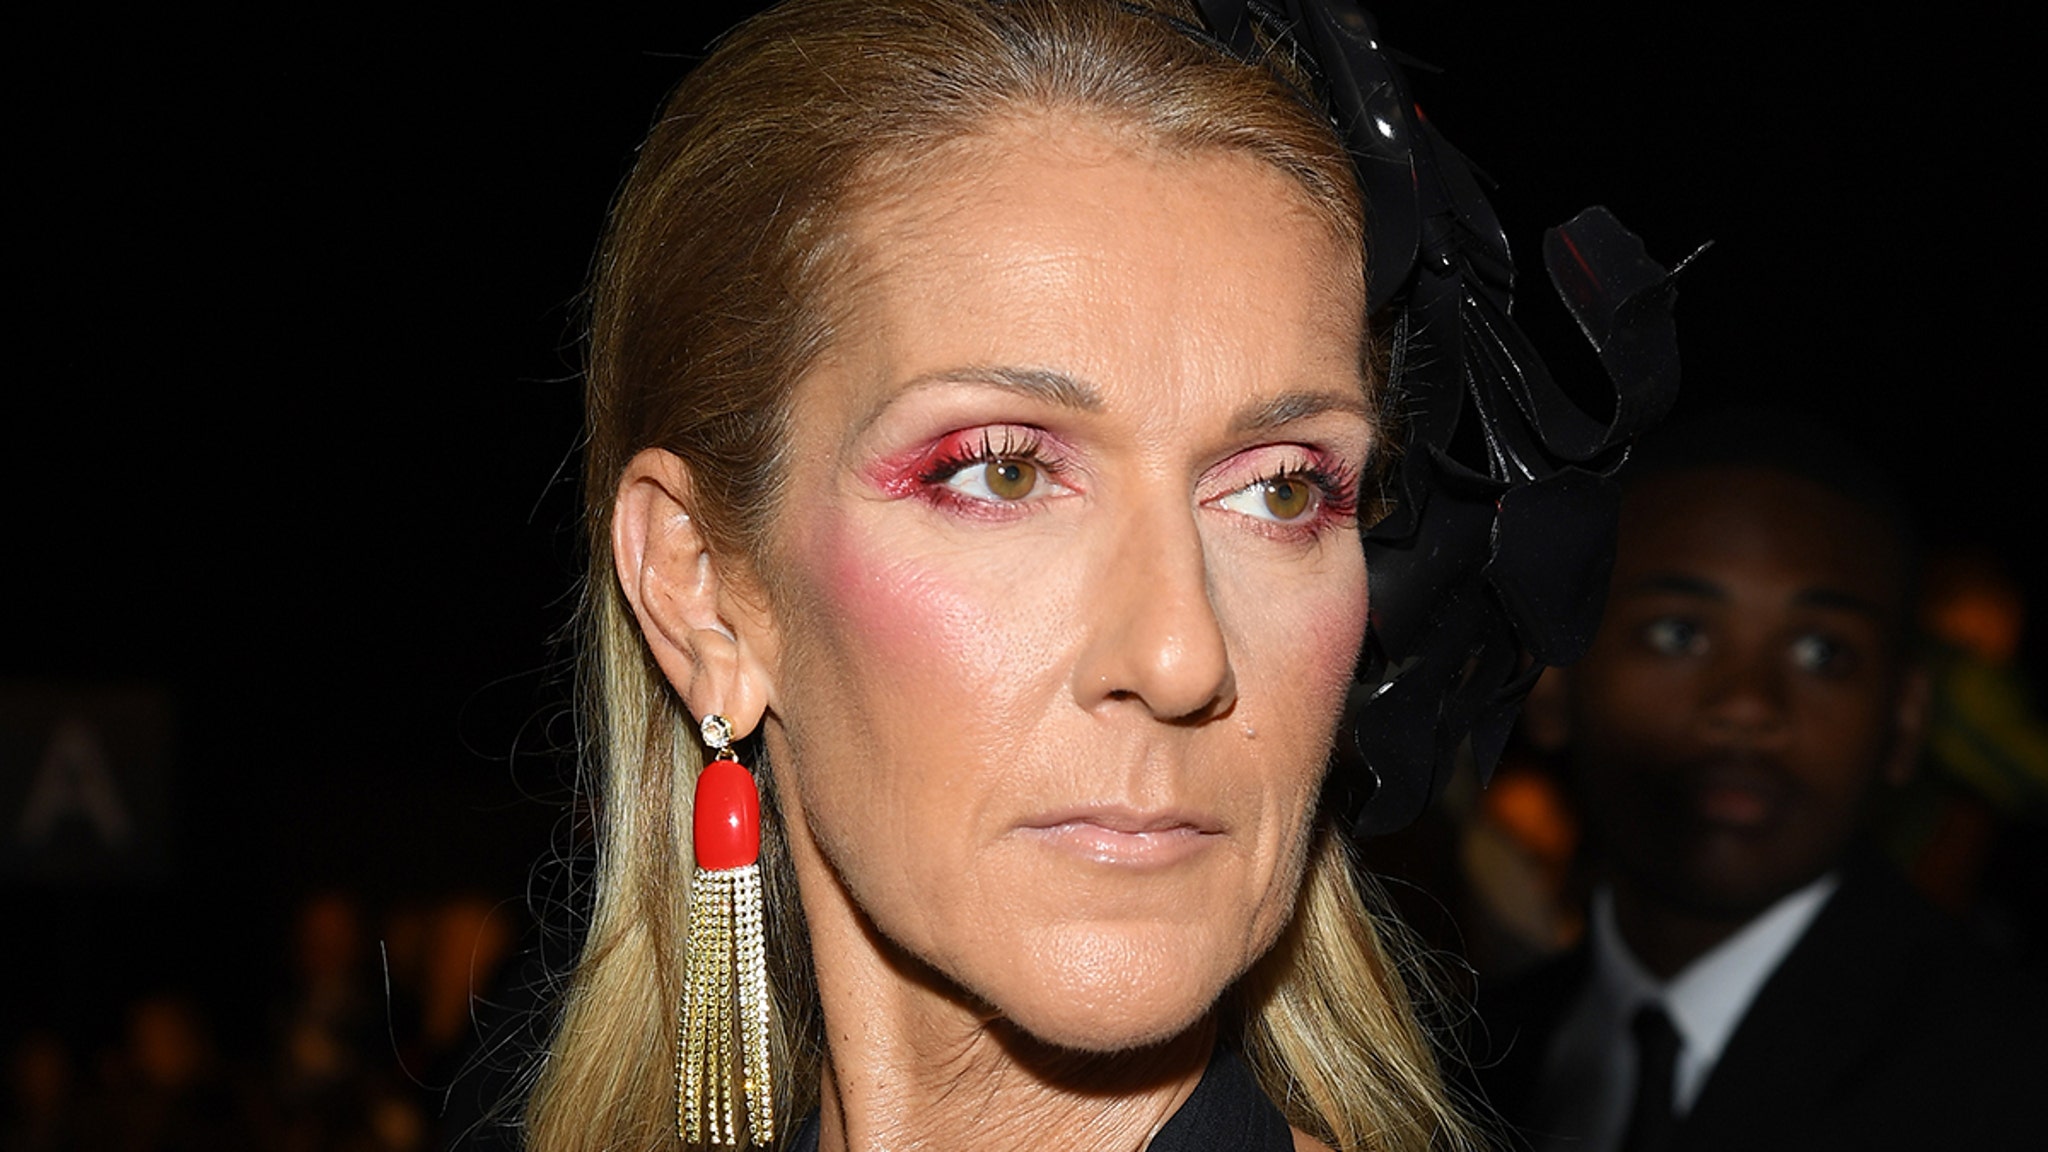 Celine Dion gives rare insight into life with stiff person syndrome